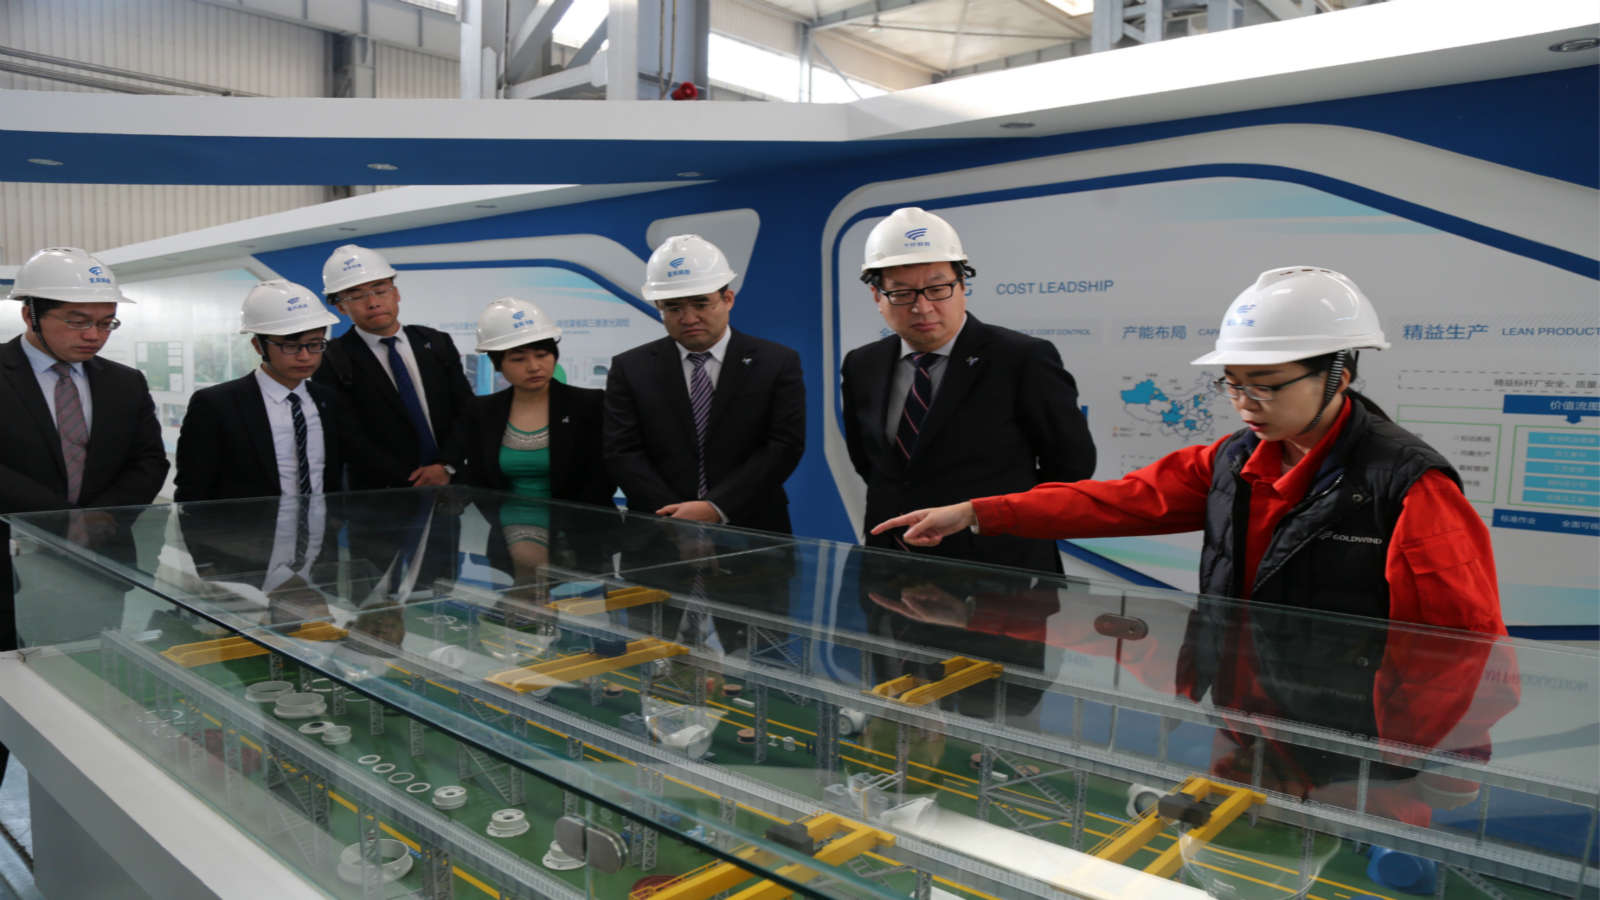 Hanas Group CEO Mr. Xu Changning led a visit to Goldwind